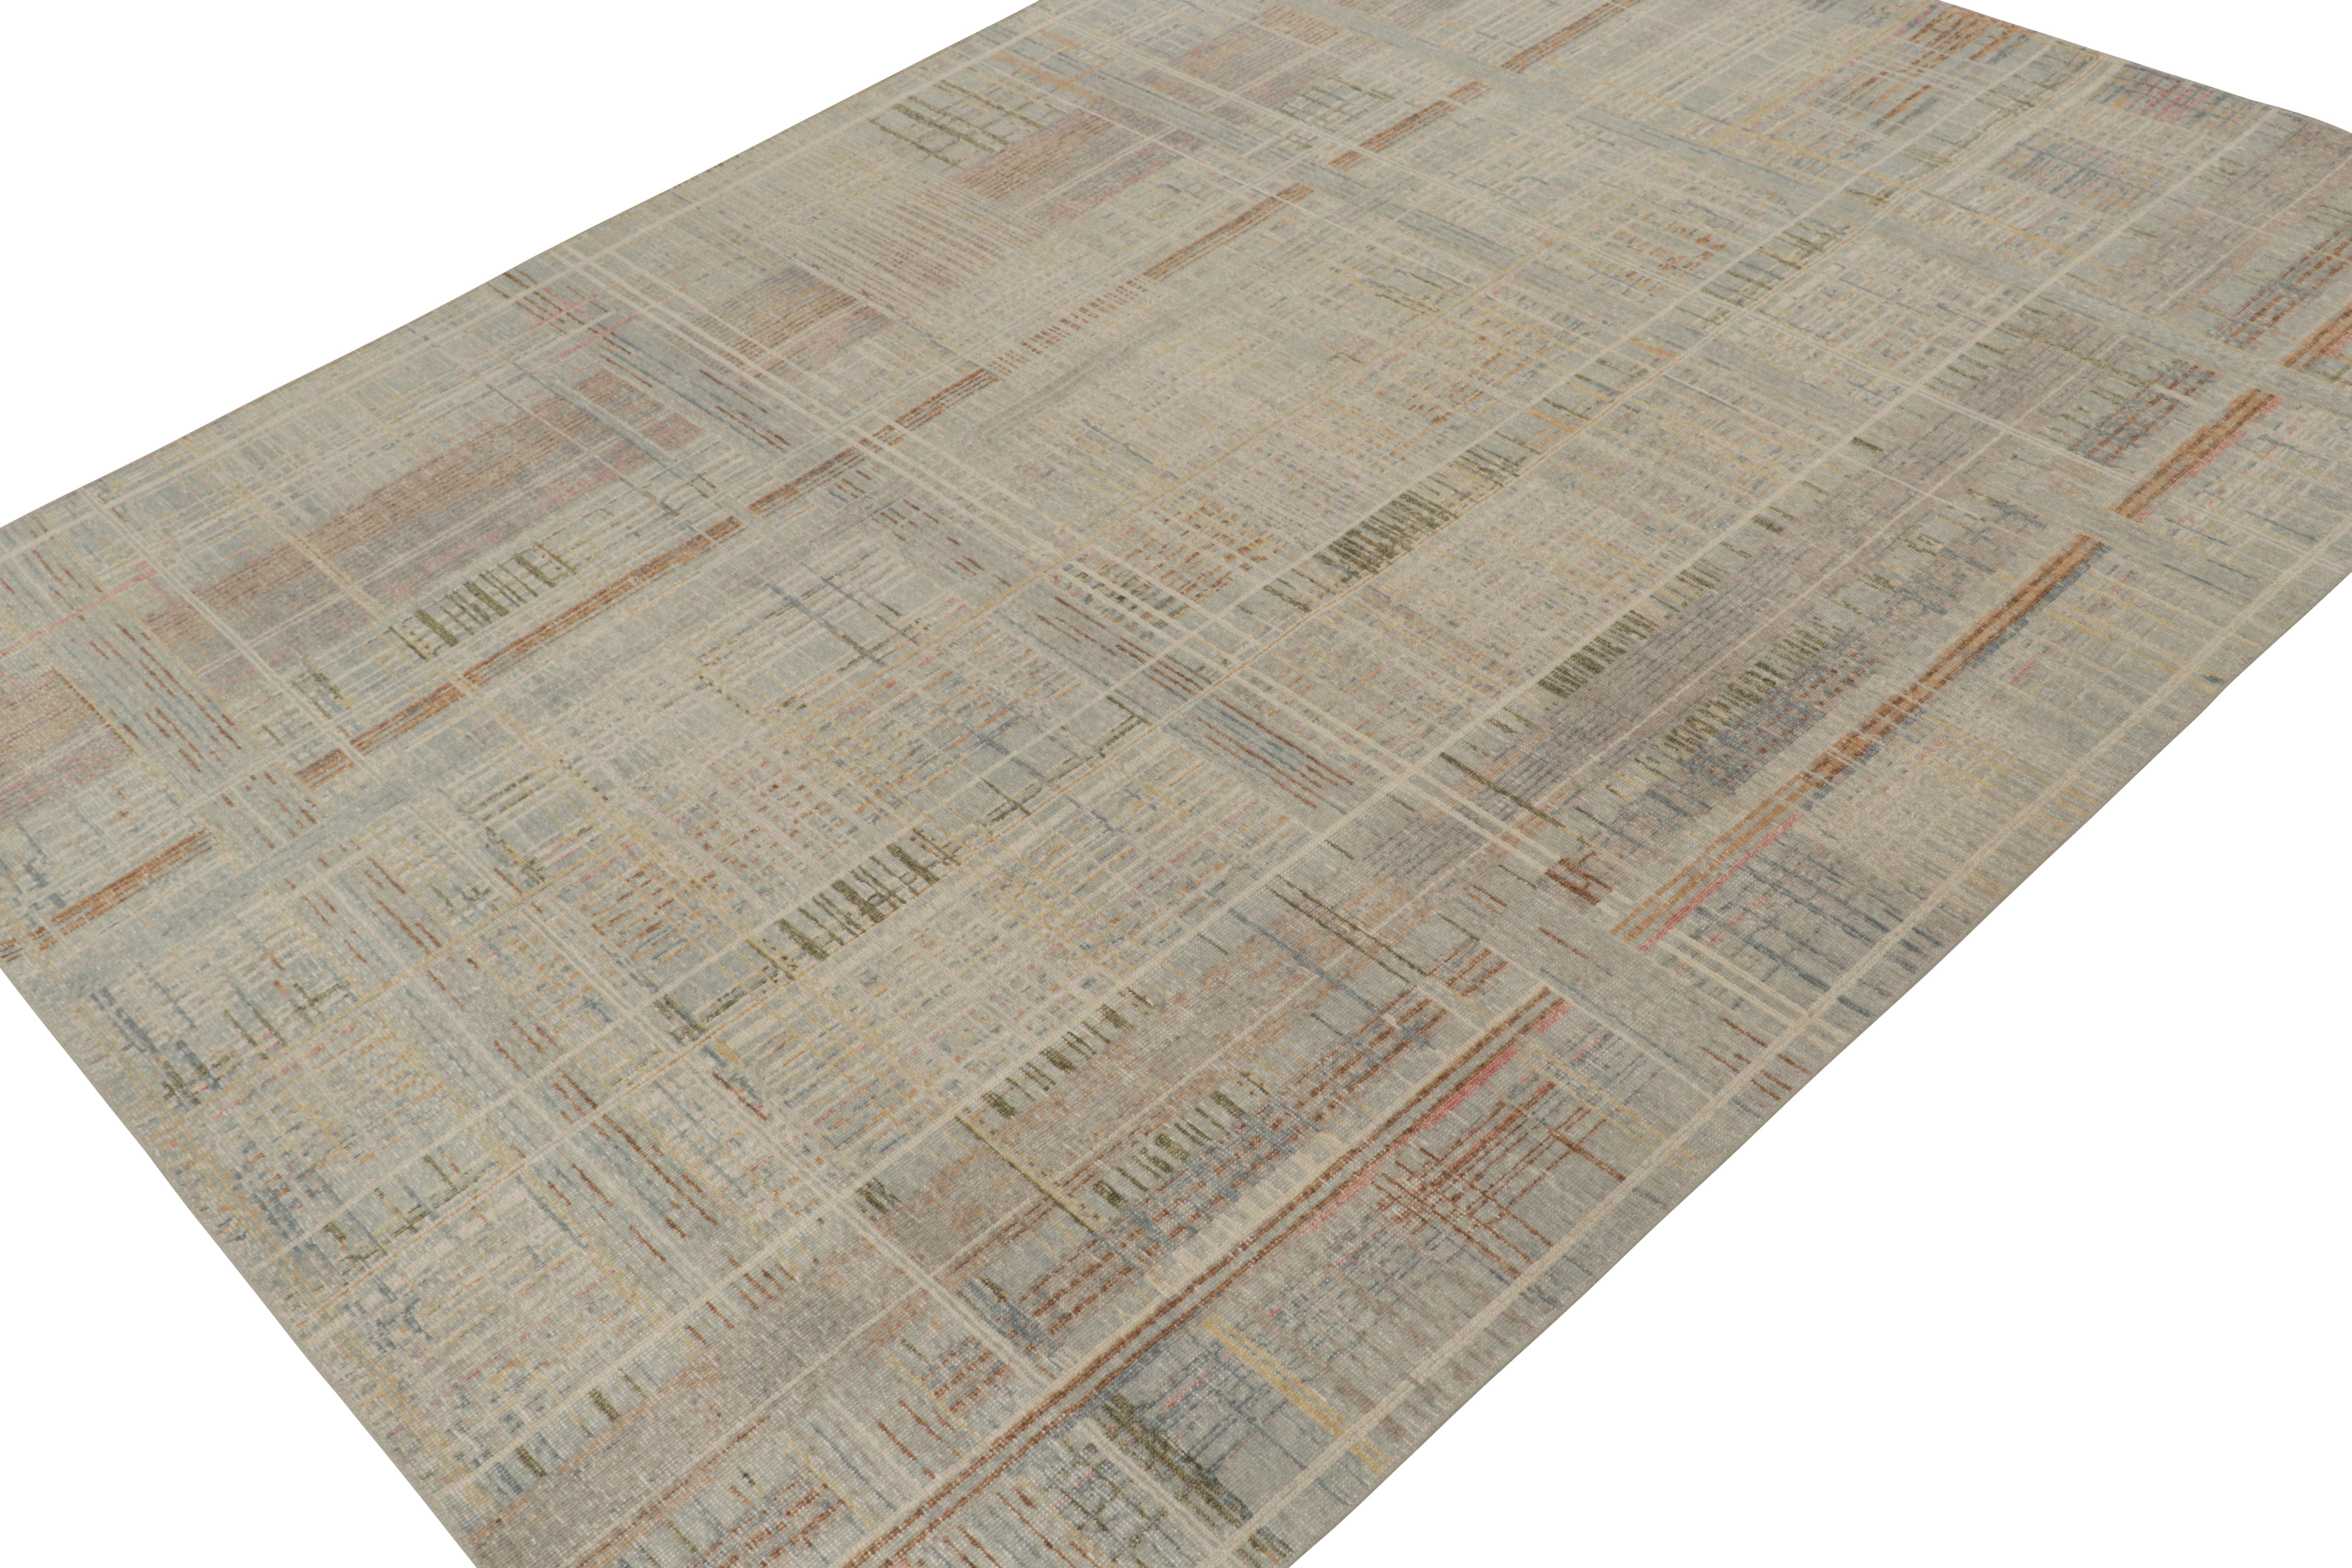 A 9x12 abstract rug, hand-knotted in distressed style wool and cotton from Rug & Kilim’s Homage Collection.

Further on the Design:

This design enjoys geometric patterns in tones of beige-brown, blue and gray that favor a brilliant, layered